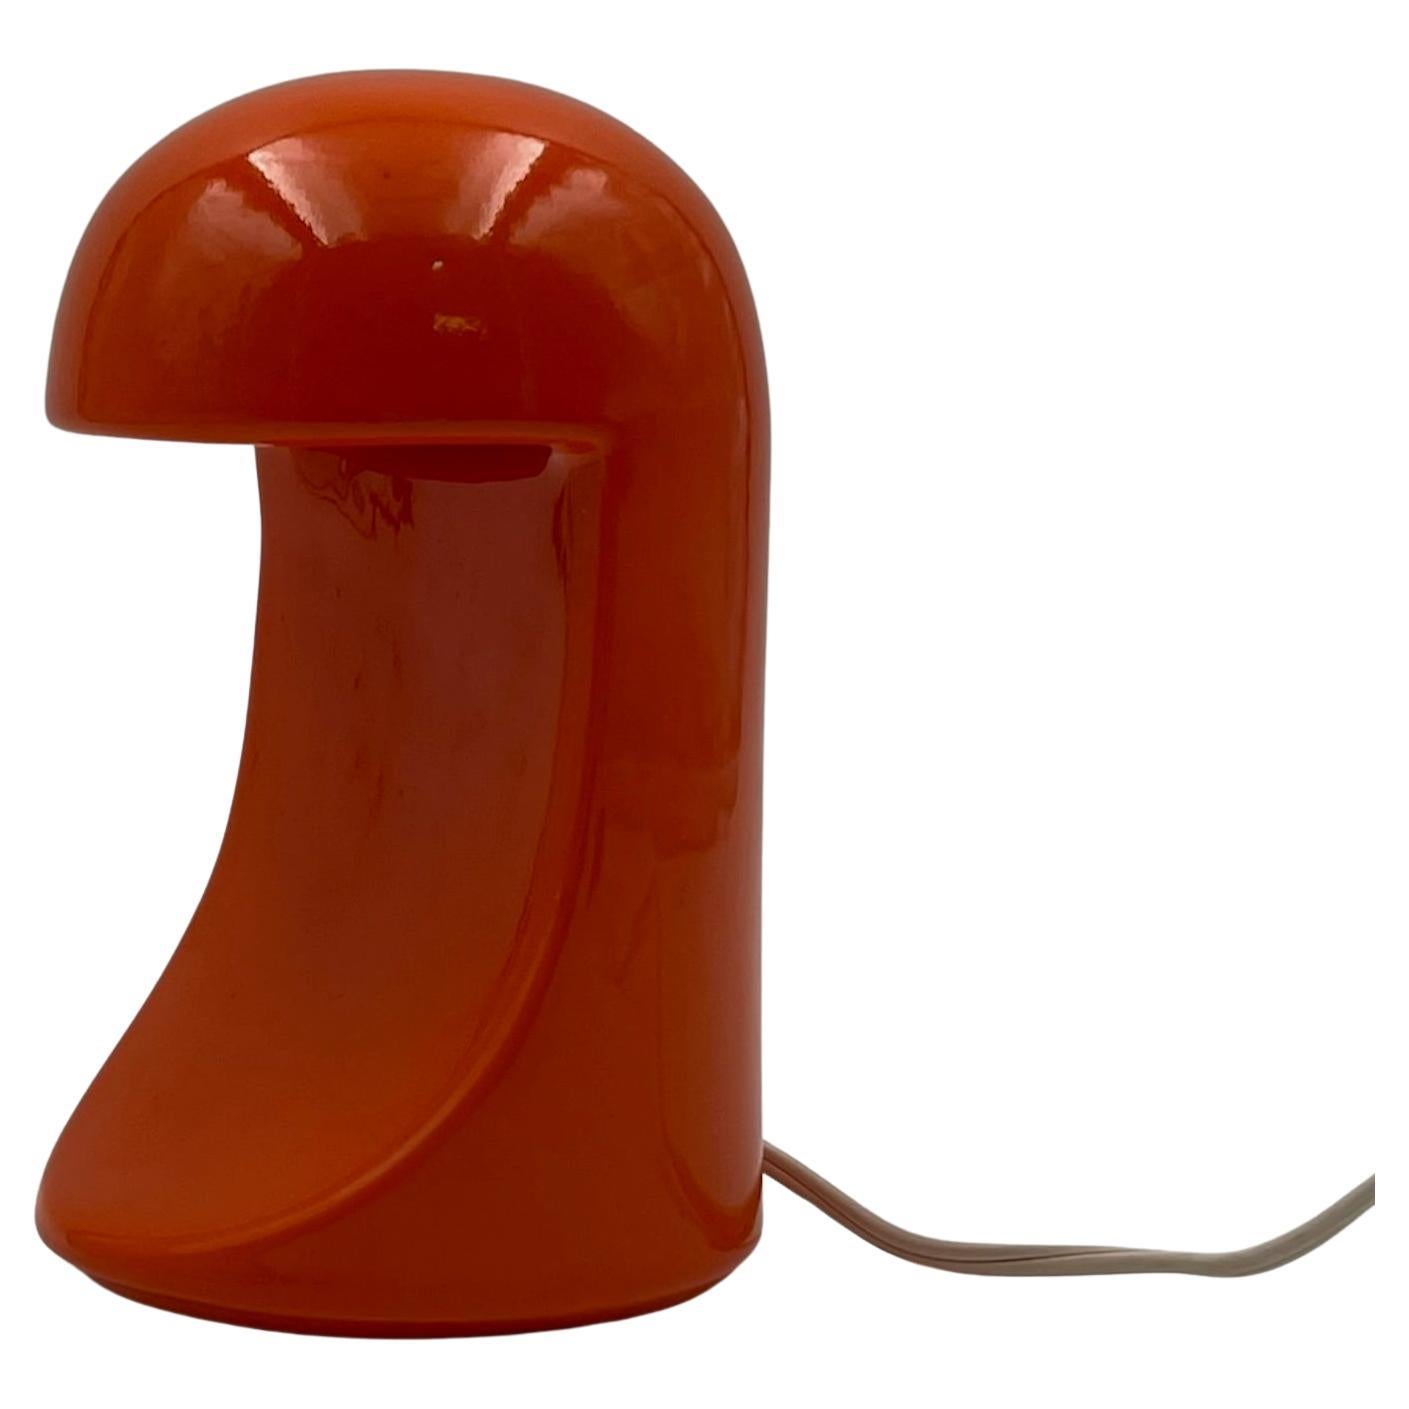 Iconic Ceramic Lamp 'Longobarda' by Marcello Cuneo for Gabbianelli, 1960s For Sale